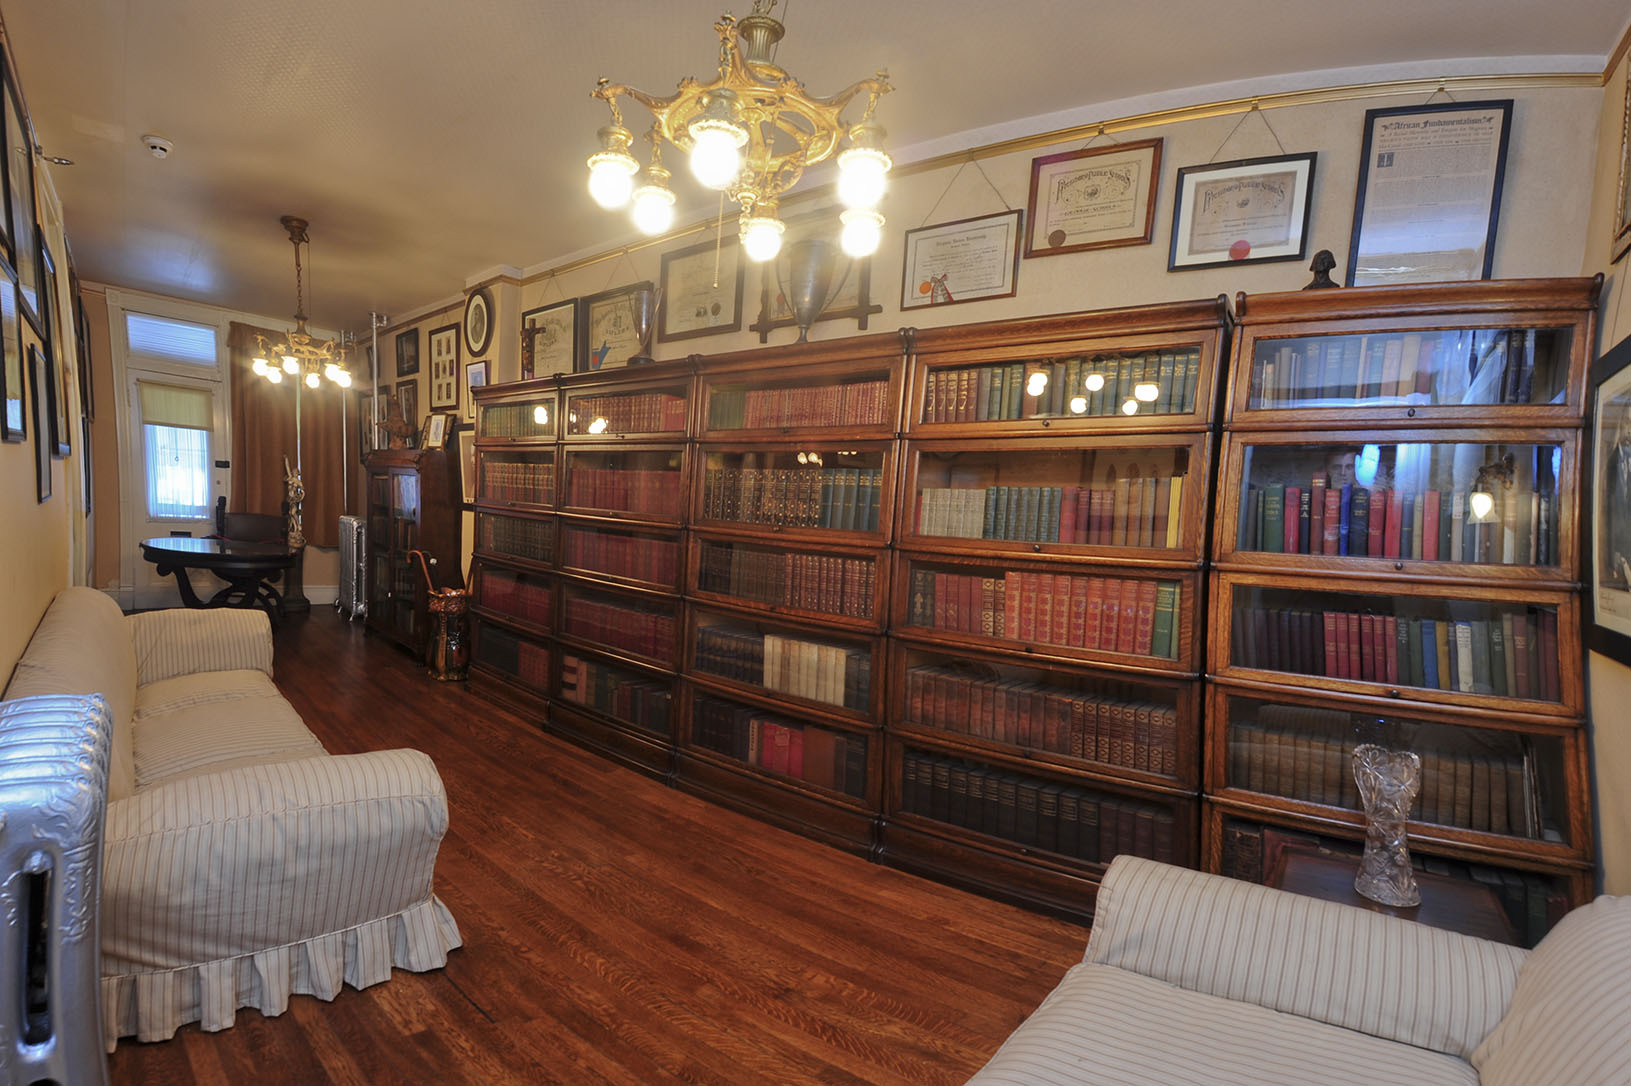 Large bookcases with over 600 books cover a full wall, a couch opposite the bookcase and a table and chair at the far end of the room.